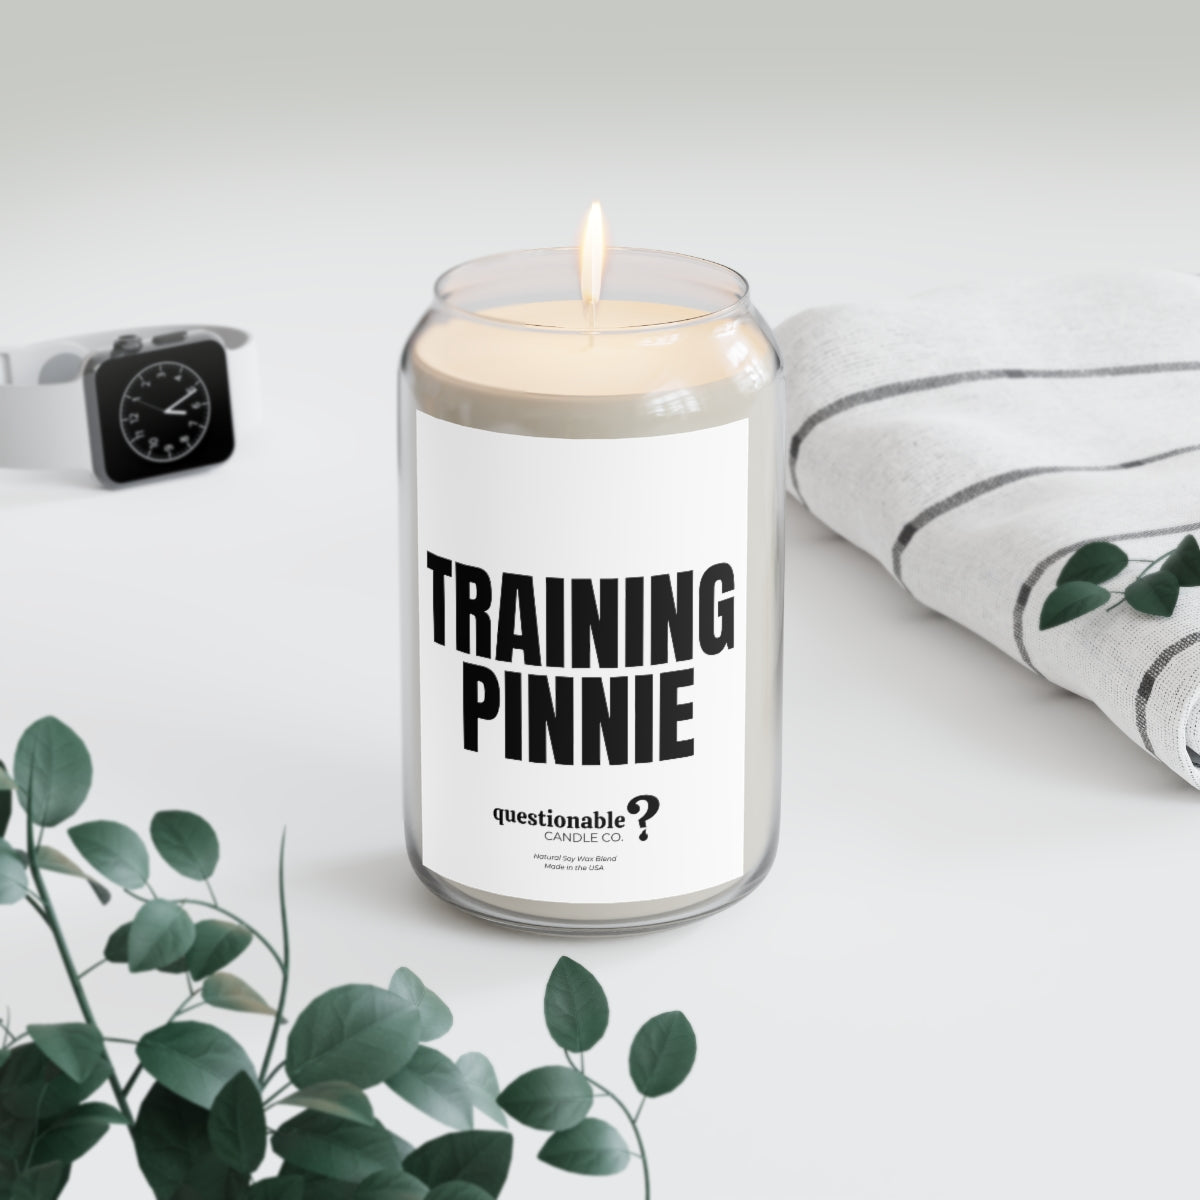 Training Pinnie Candle